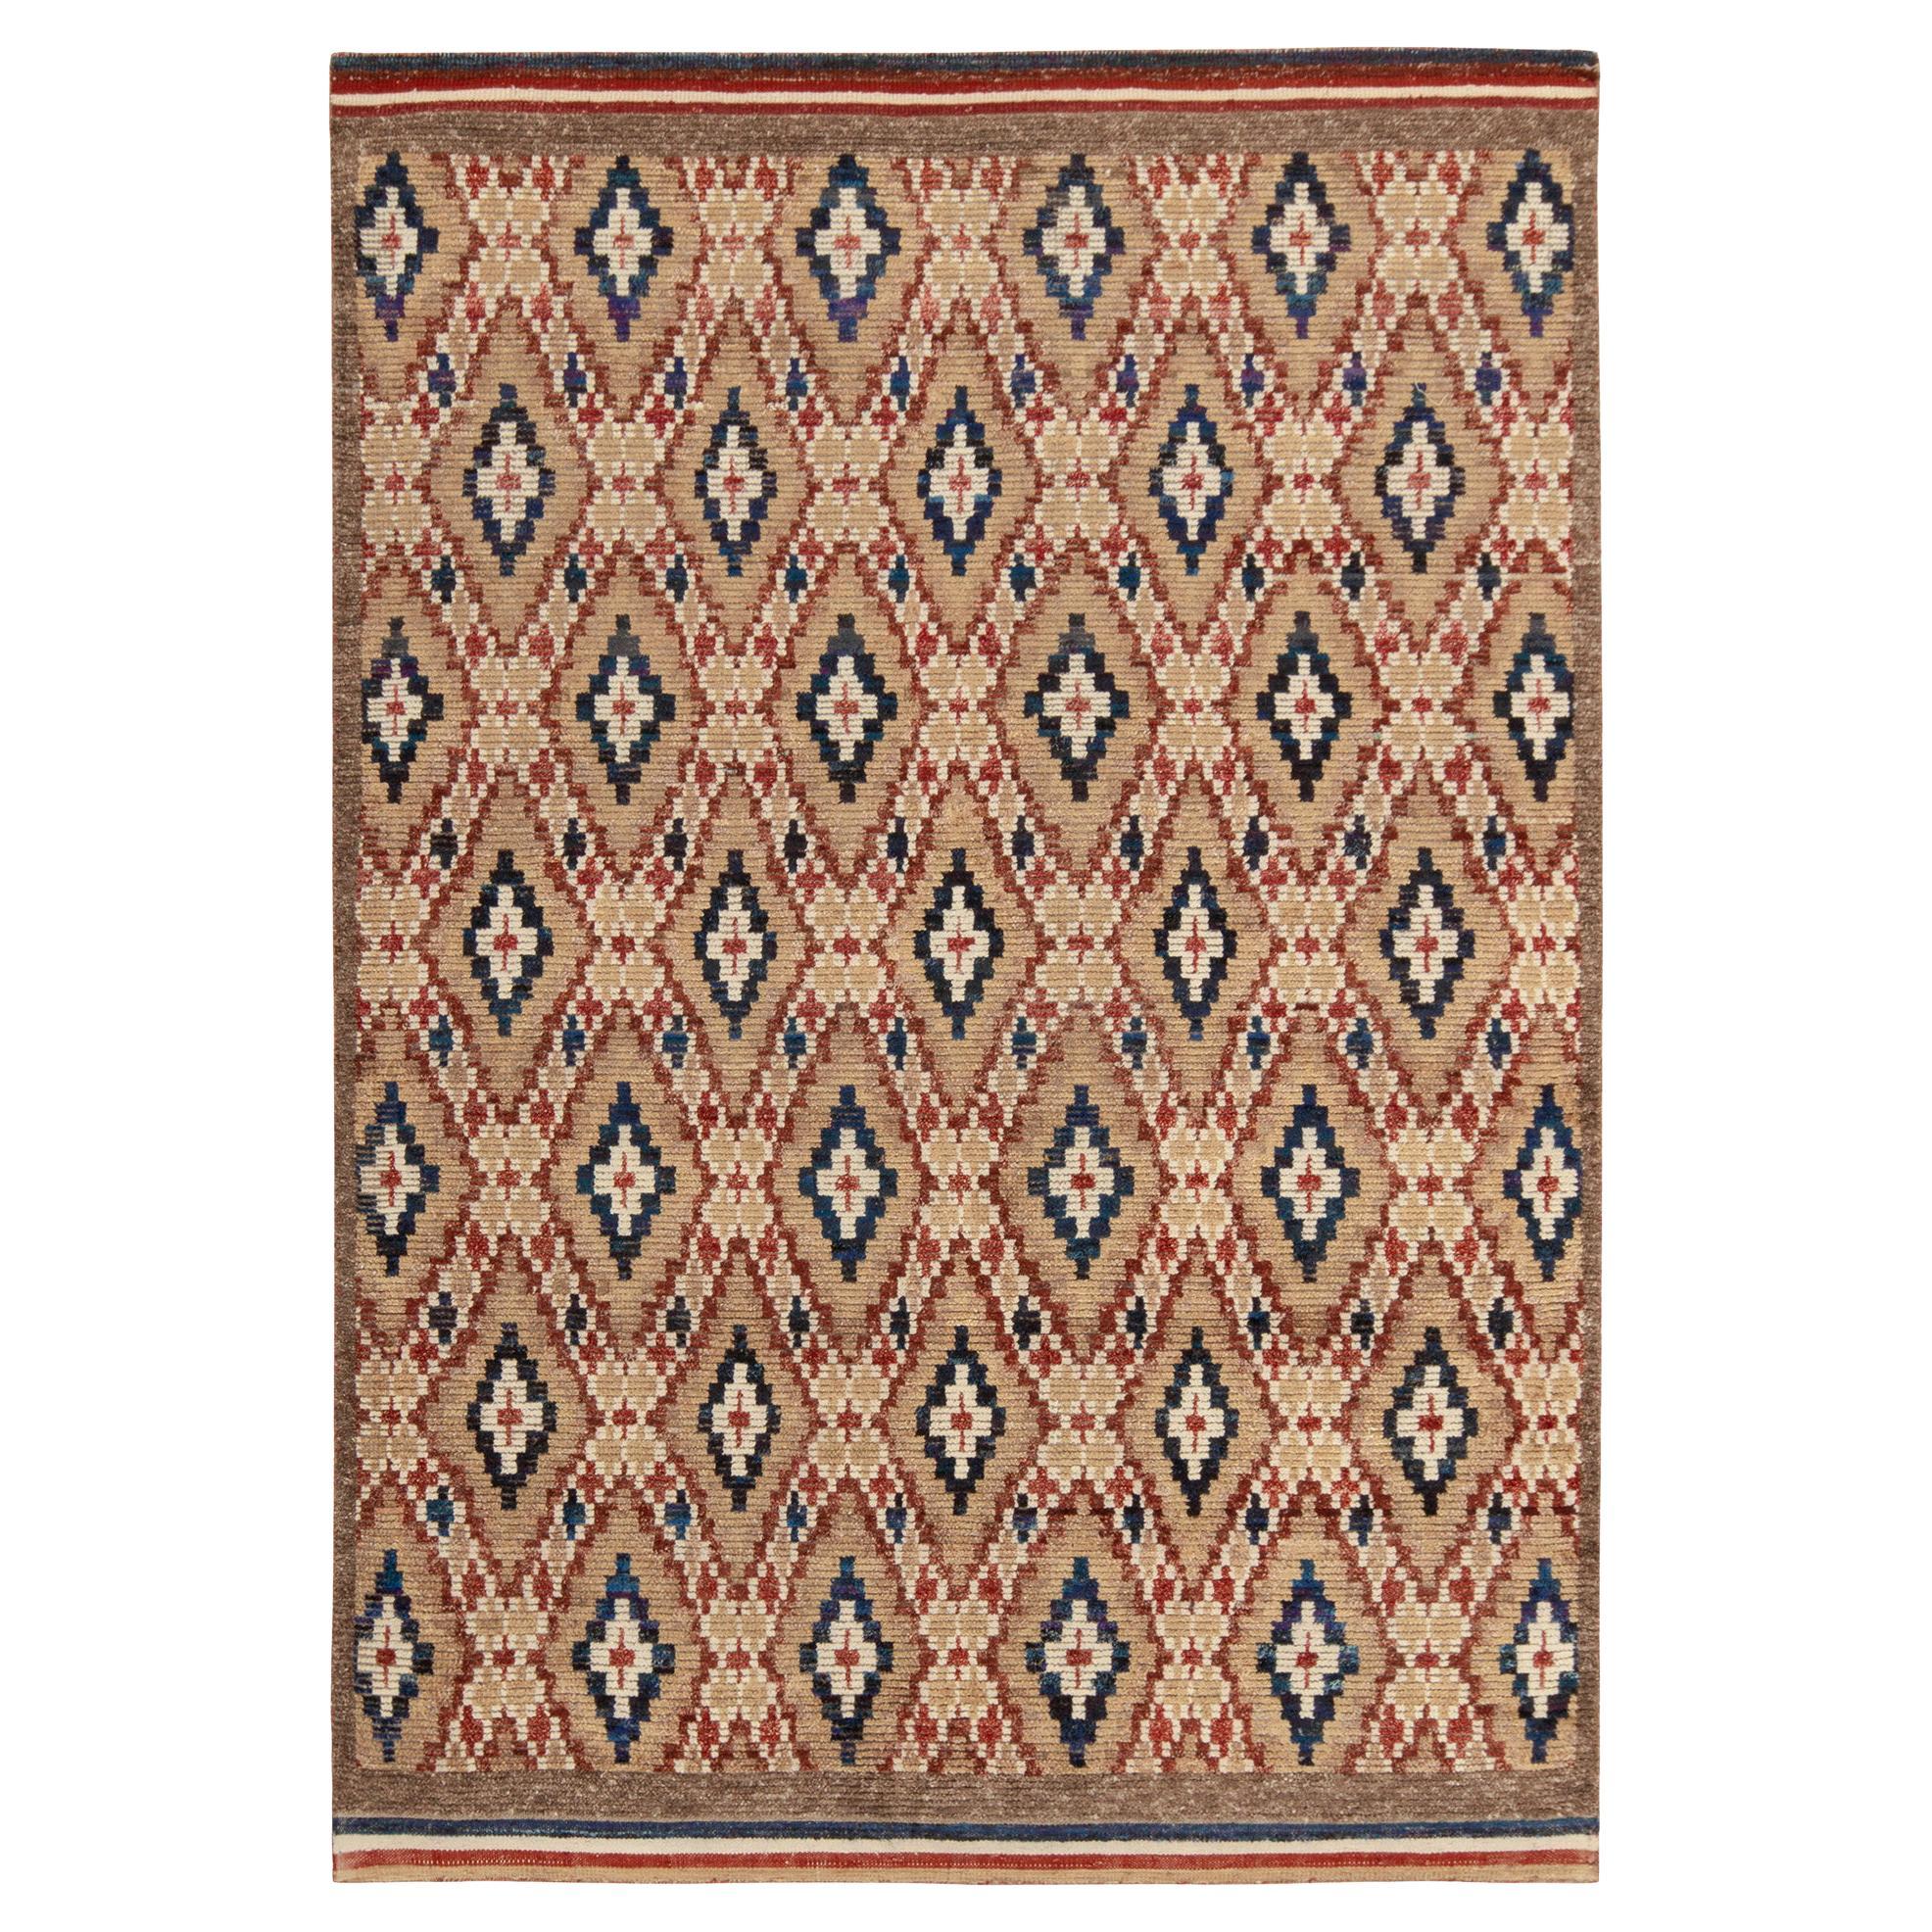 Rug & Kilim's Moroccan Style Rug in Beige-Brown, Red and Blue Diamond Patterns For Sale